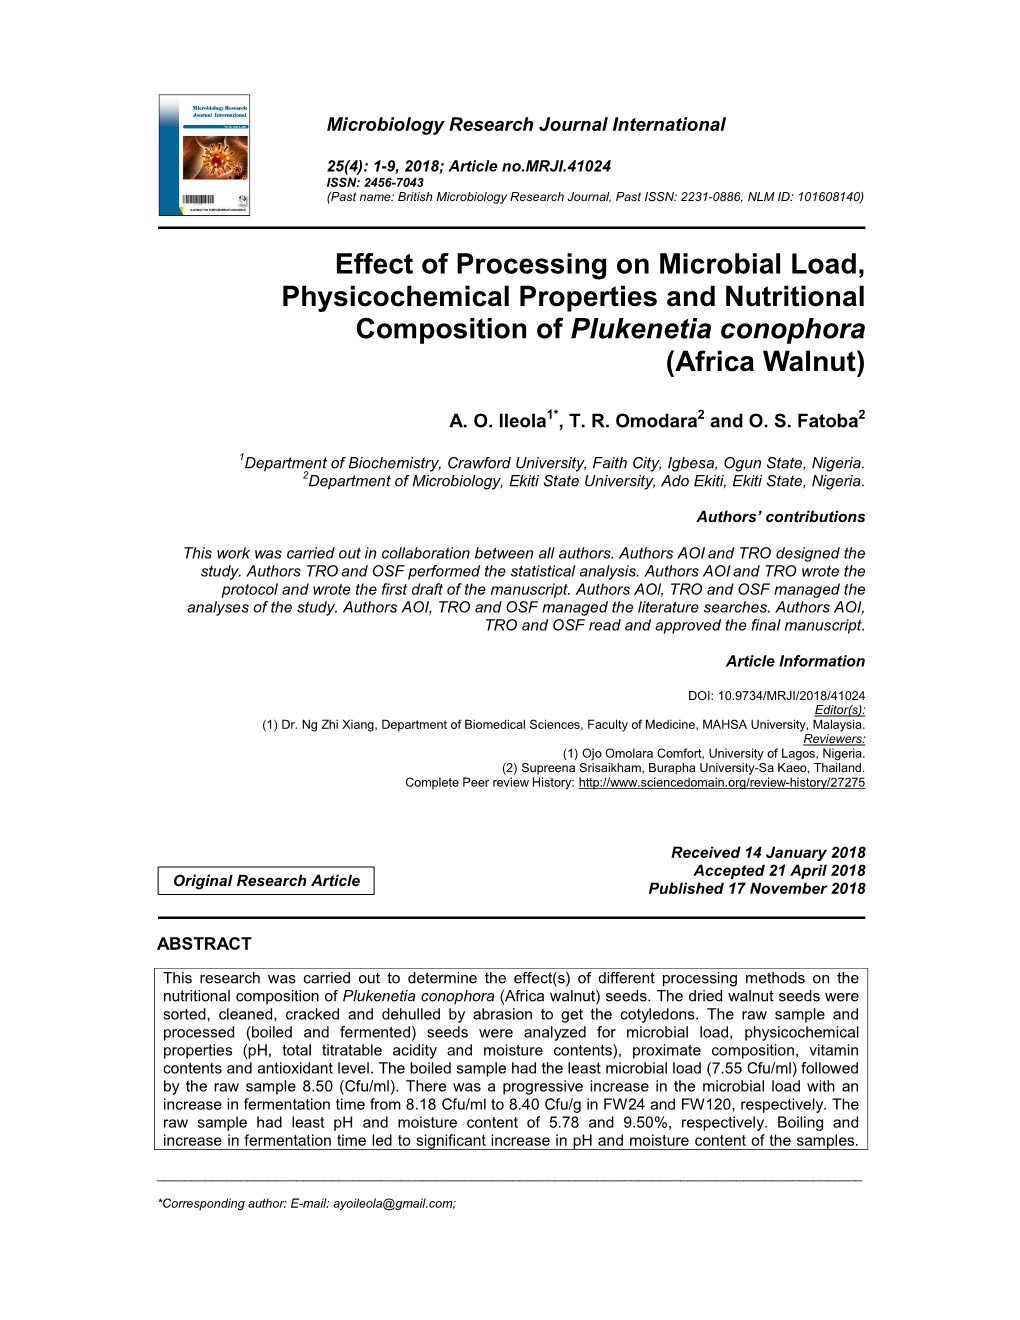 Effect of Processing on Microbial Load, Physicochemical Properties and Nutritional Composition of Plukenetia Conophora (Africa Walnut)